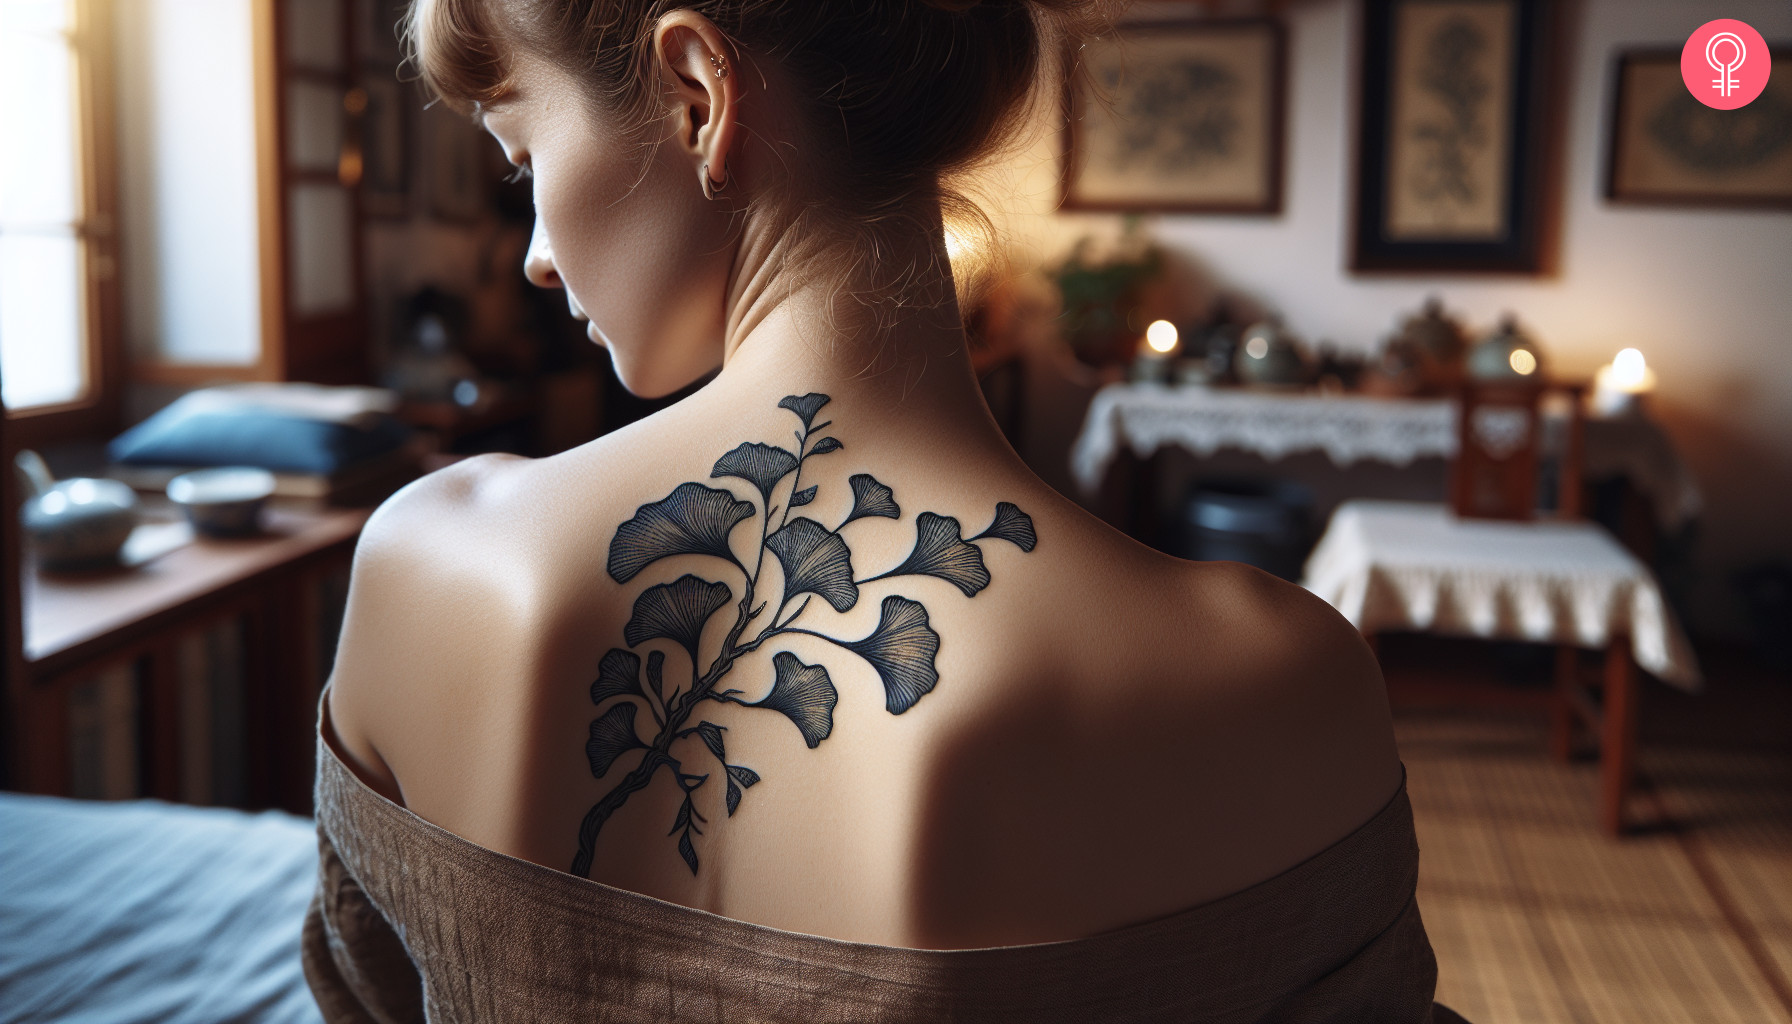 A woman with a Ginkgo branch and leaves tattoo on her shoulder